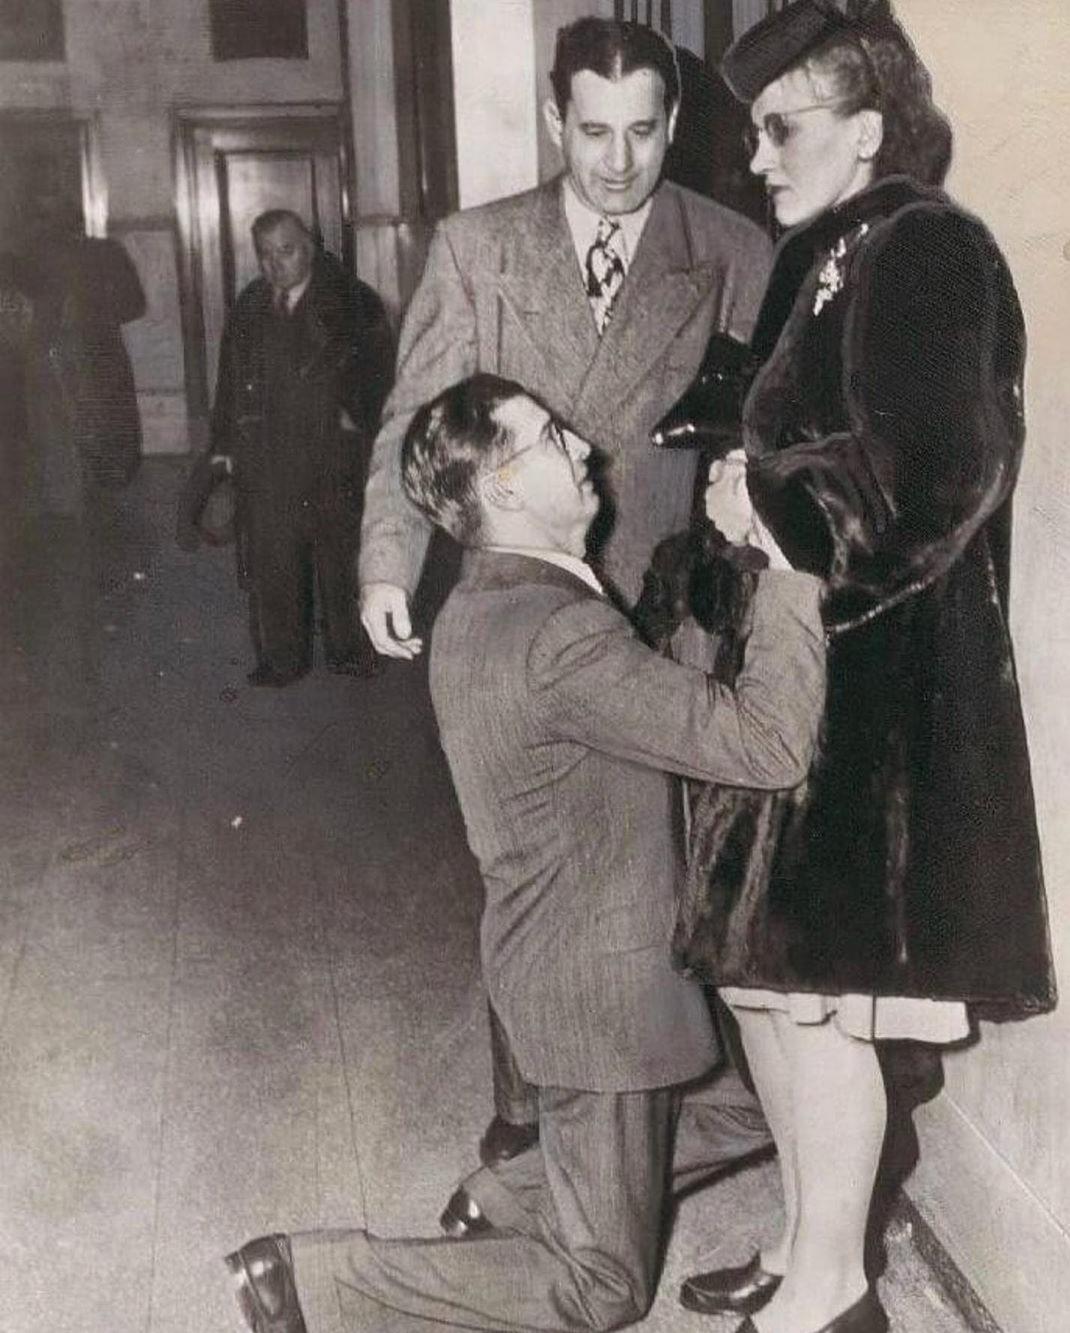 Man begs for her forgiveness outside divorce court, circa 1942.